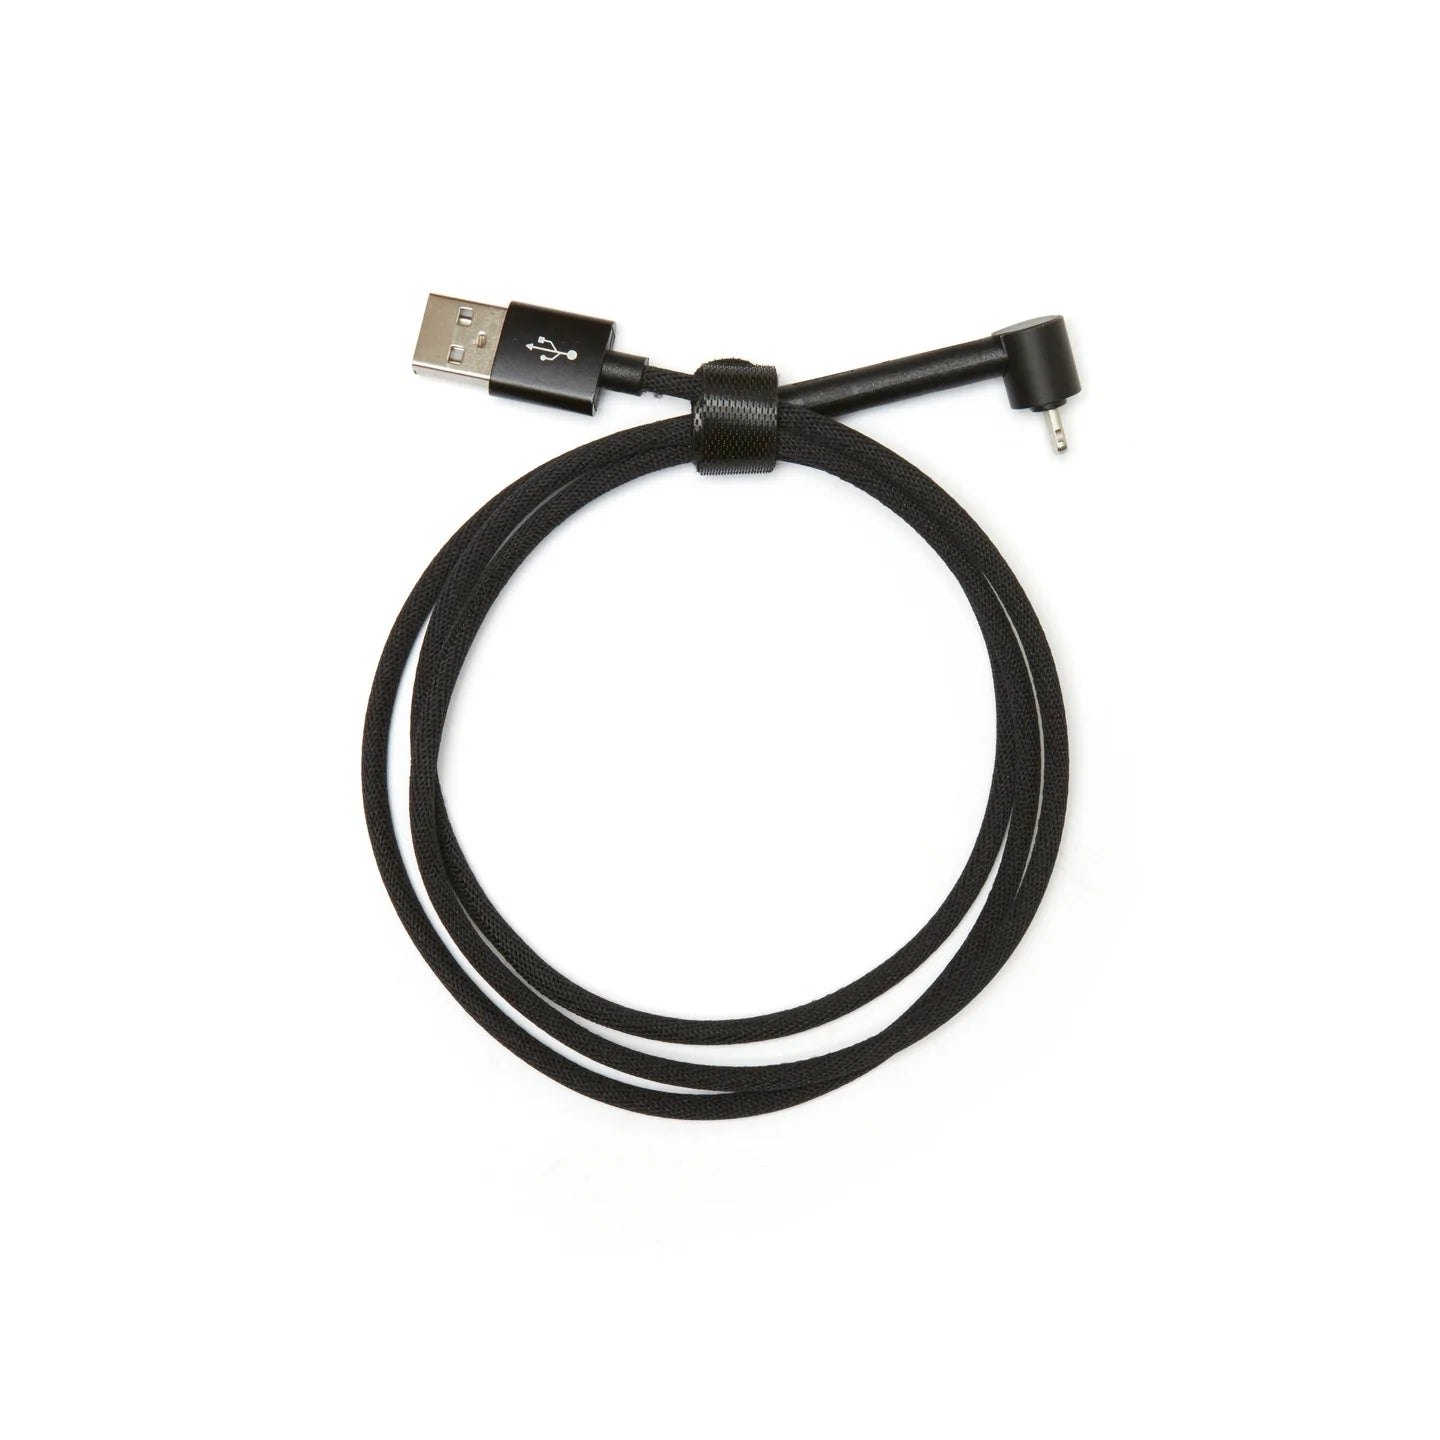 Fabulous Gifts | Kikkerland - Iphone Lightening Cable Stand by Weirs of Baggot Street